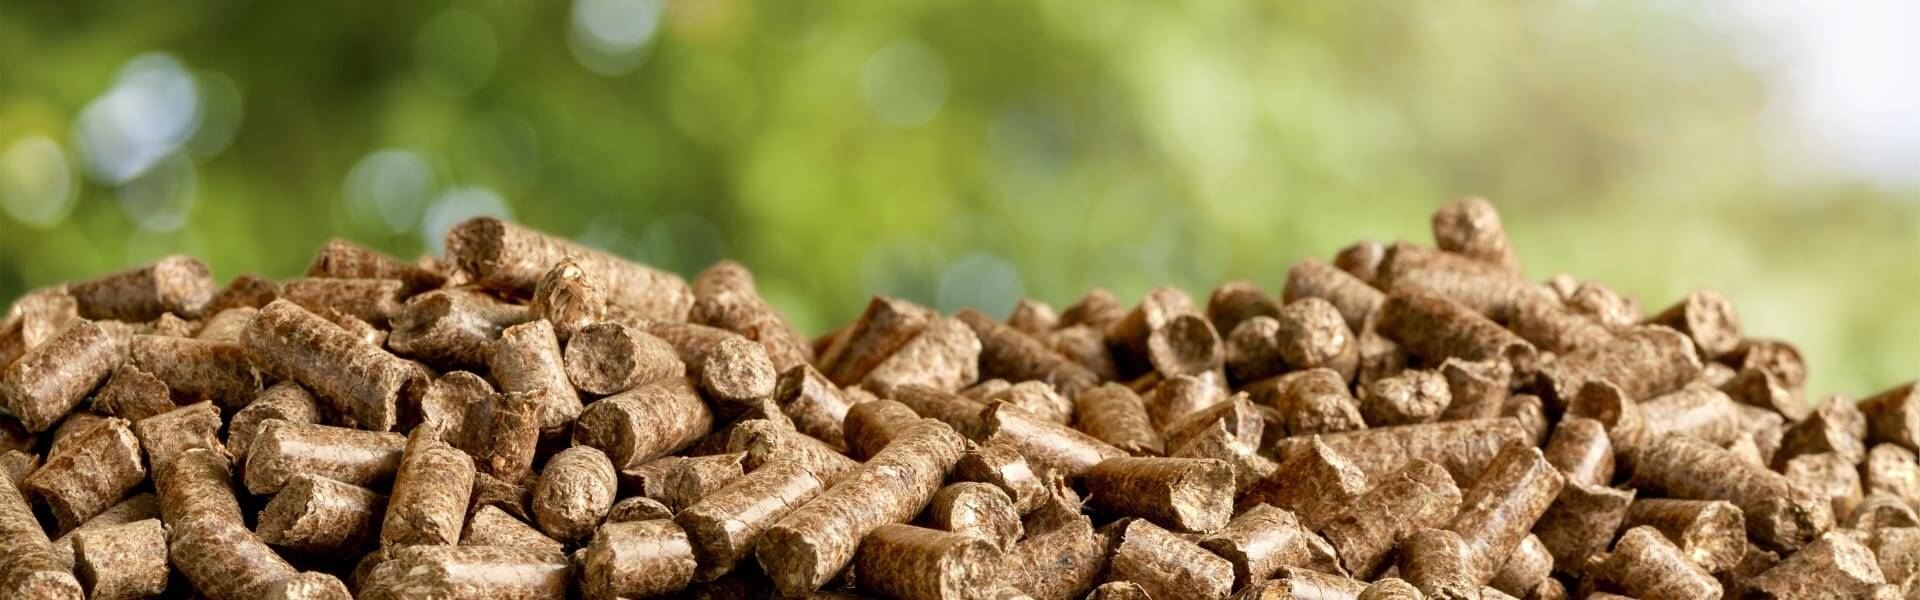 Bioenergy with CCS ‘critical’ to achieving net-zero target